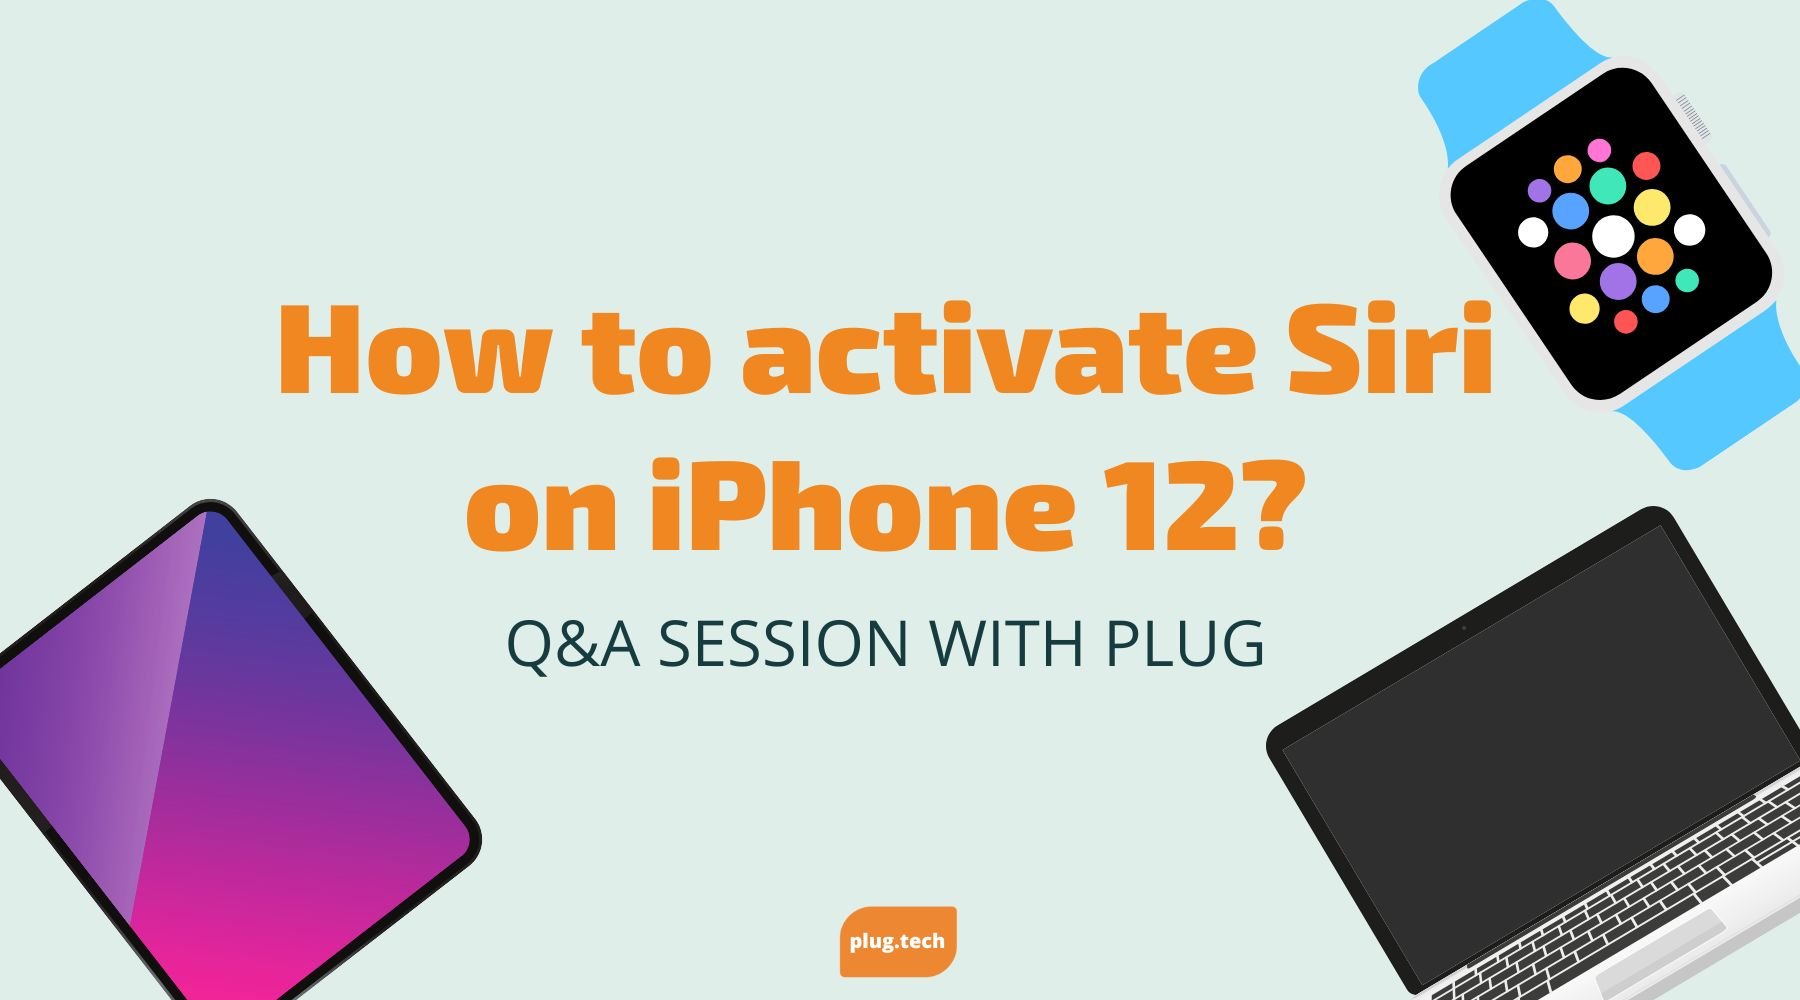 How to activate siri on iPhone 12?